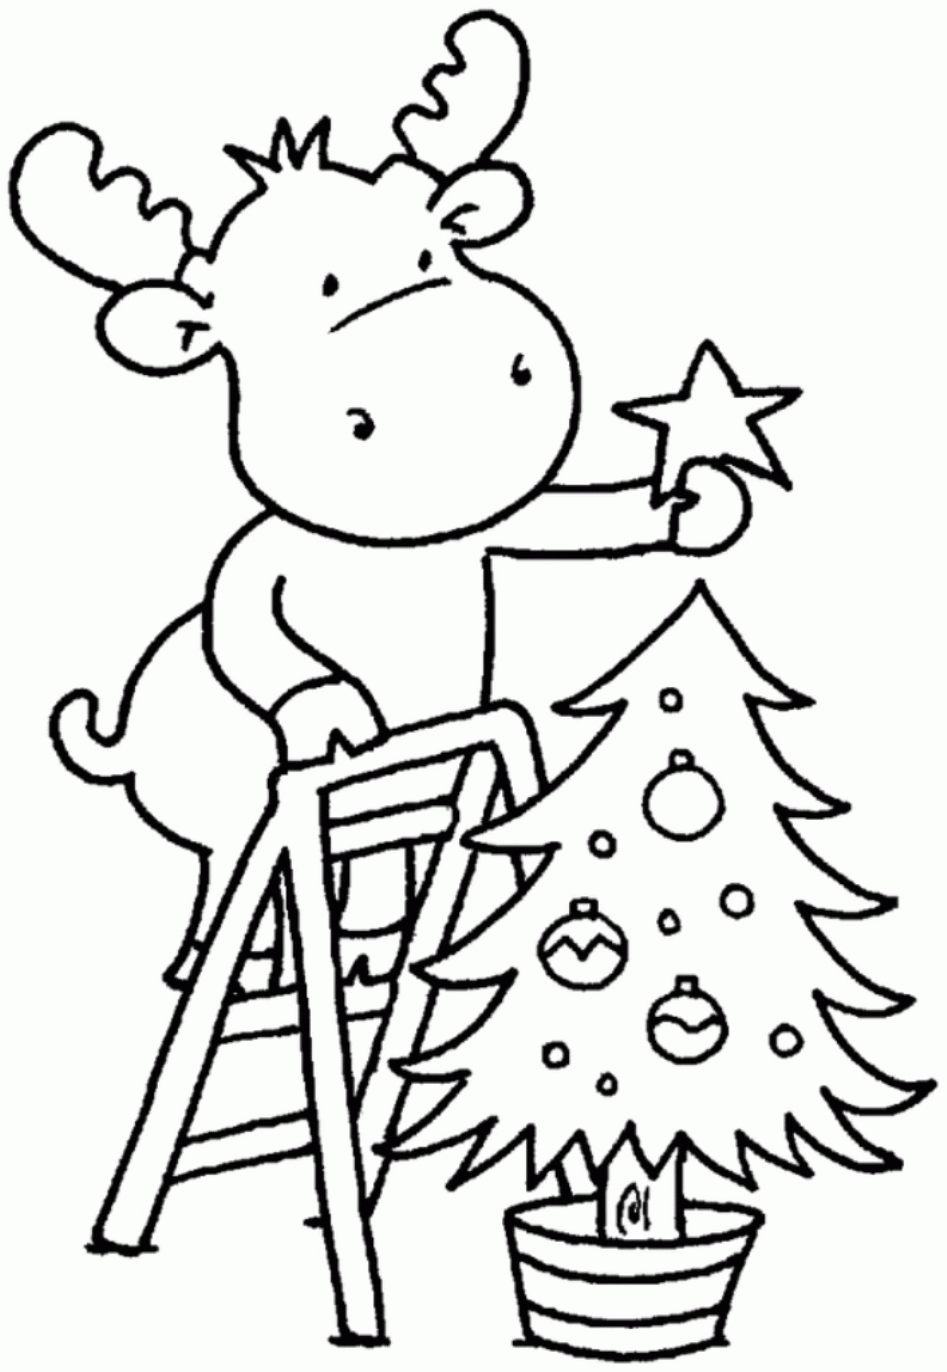 Coloring Pages Christmas Tree For Children | Christmas Coloring ...